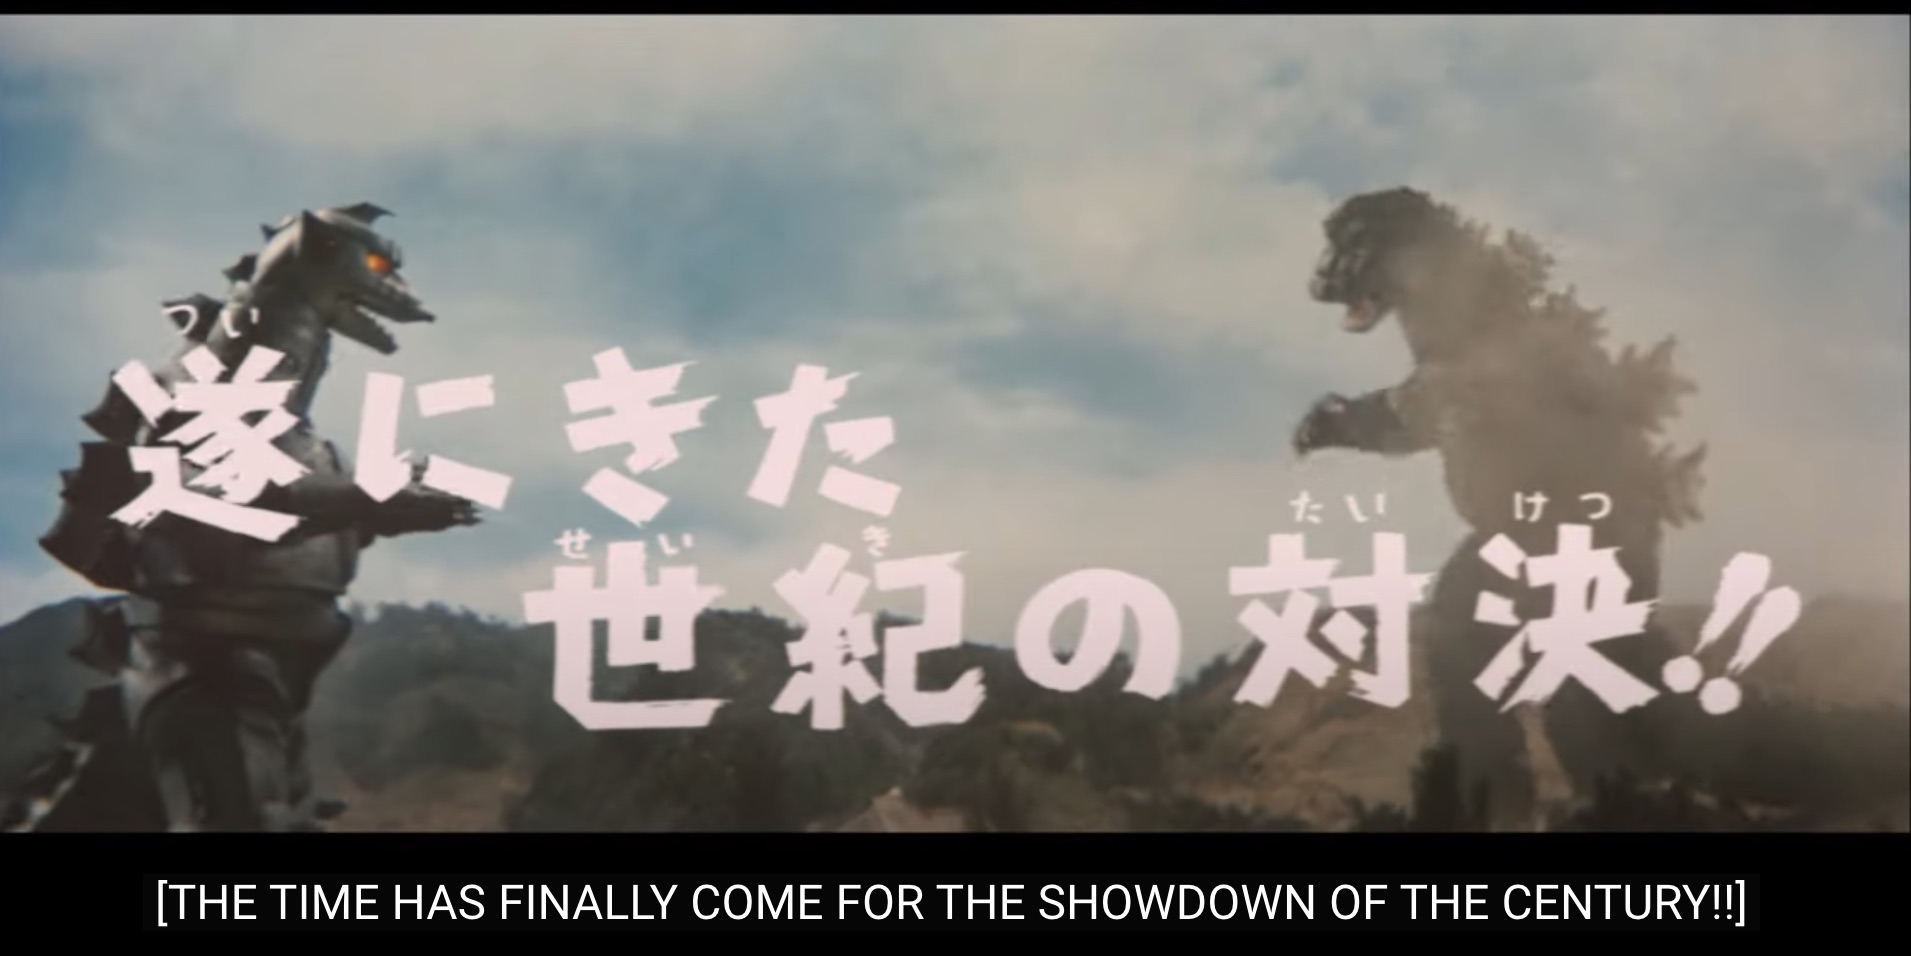 screenshot for the Japanese trailer for the 1974 movie "Godzilla vs. Mechagodzilla." On the far left side is Mechagodzilla; facing him from the far right is Godzilla. In between the two, superimposed on the screen are Japanese characters. A translation in the English subtitle at the bottom of the image reads: "The Time has Finally Come for the Showdown of the Century!!"